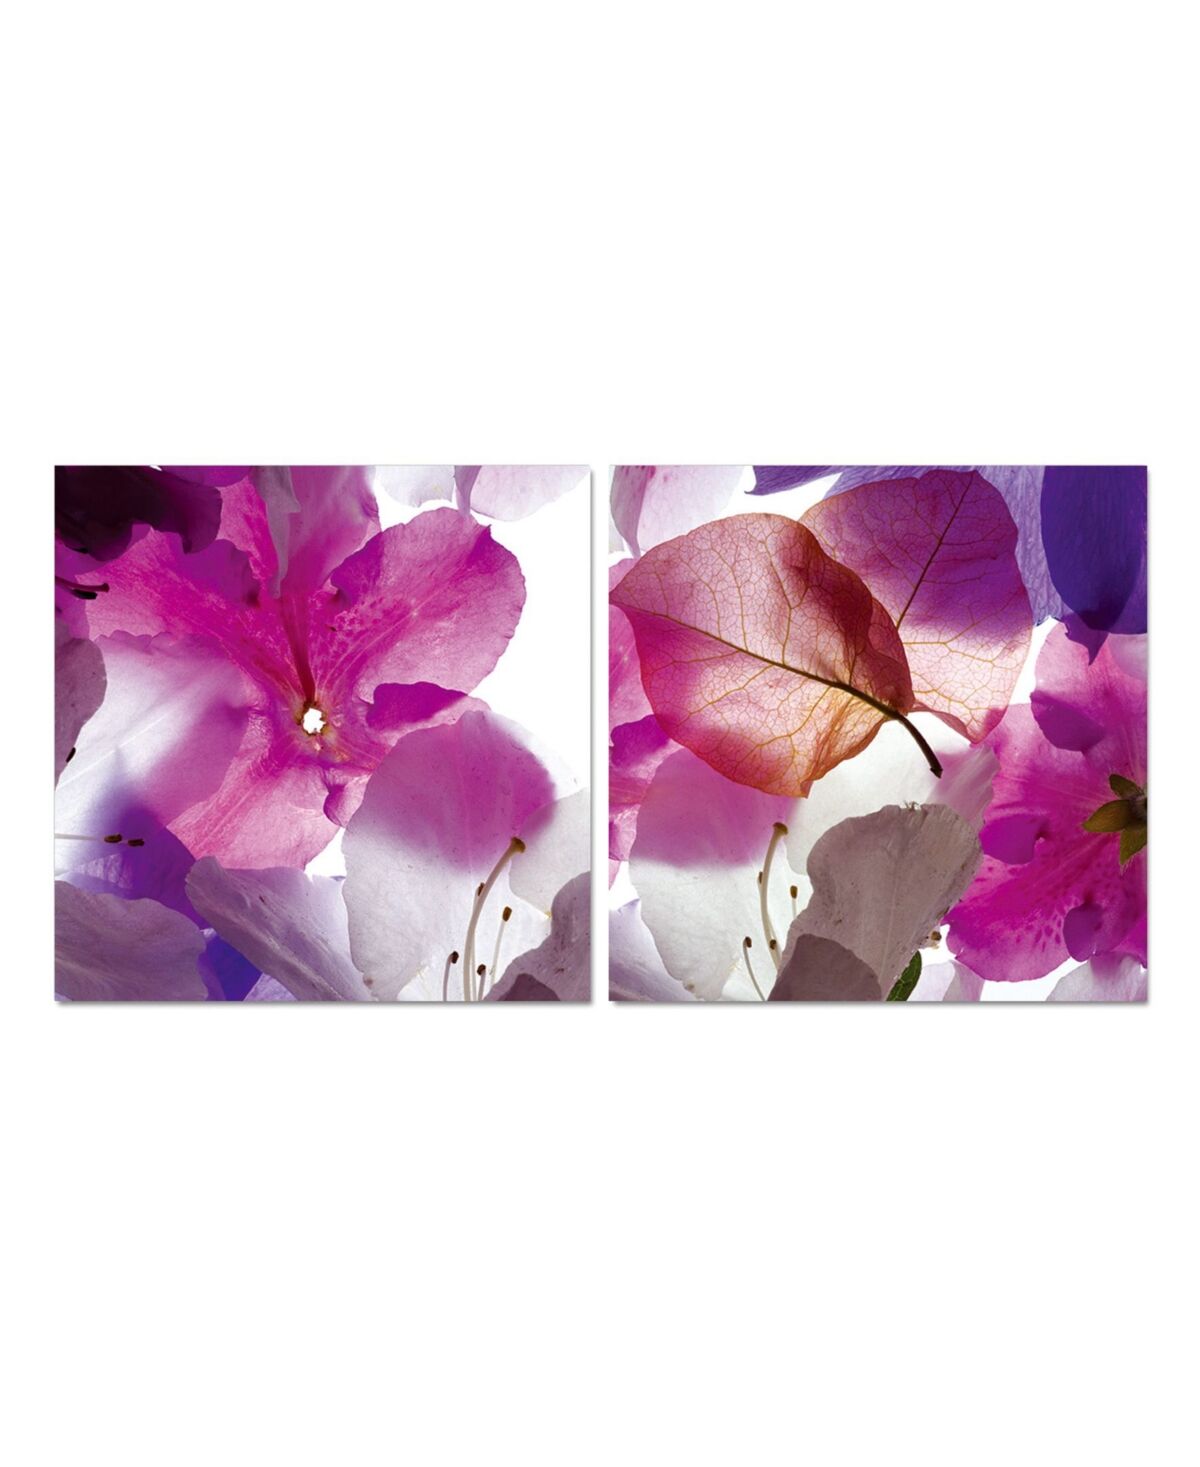 Chic Home Decor Orchid 2 Piece Wrapped Canvas Wall Art Floral Design -27